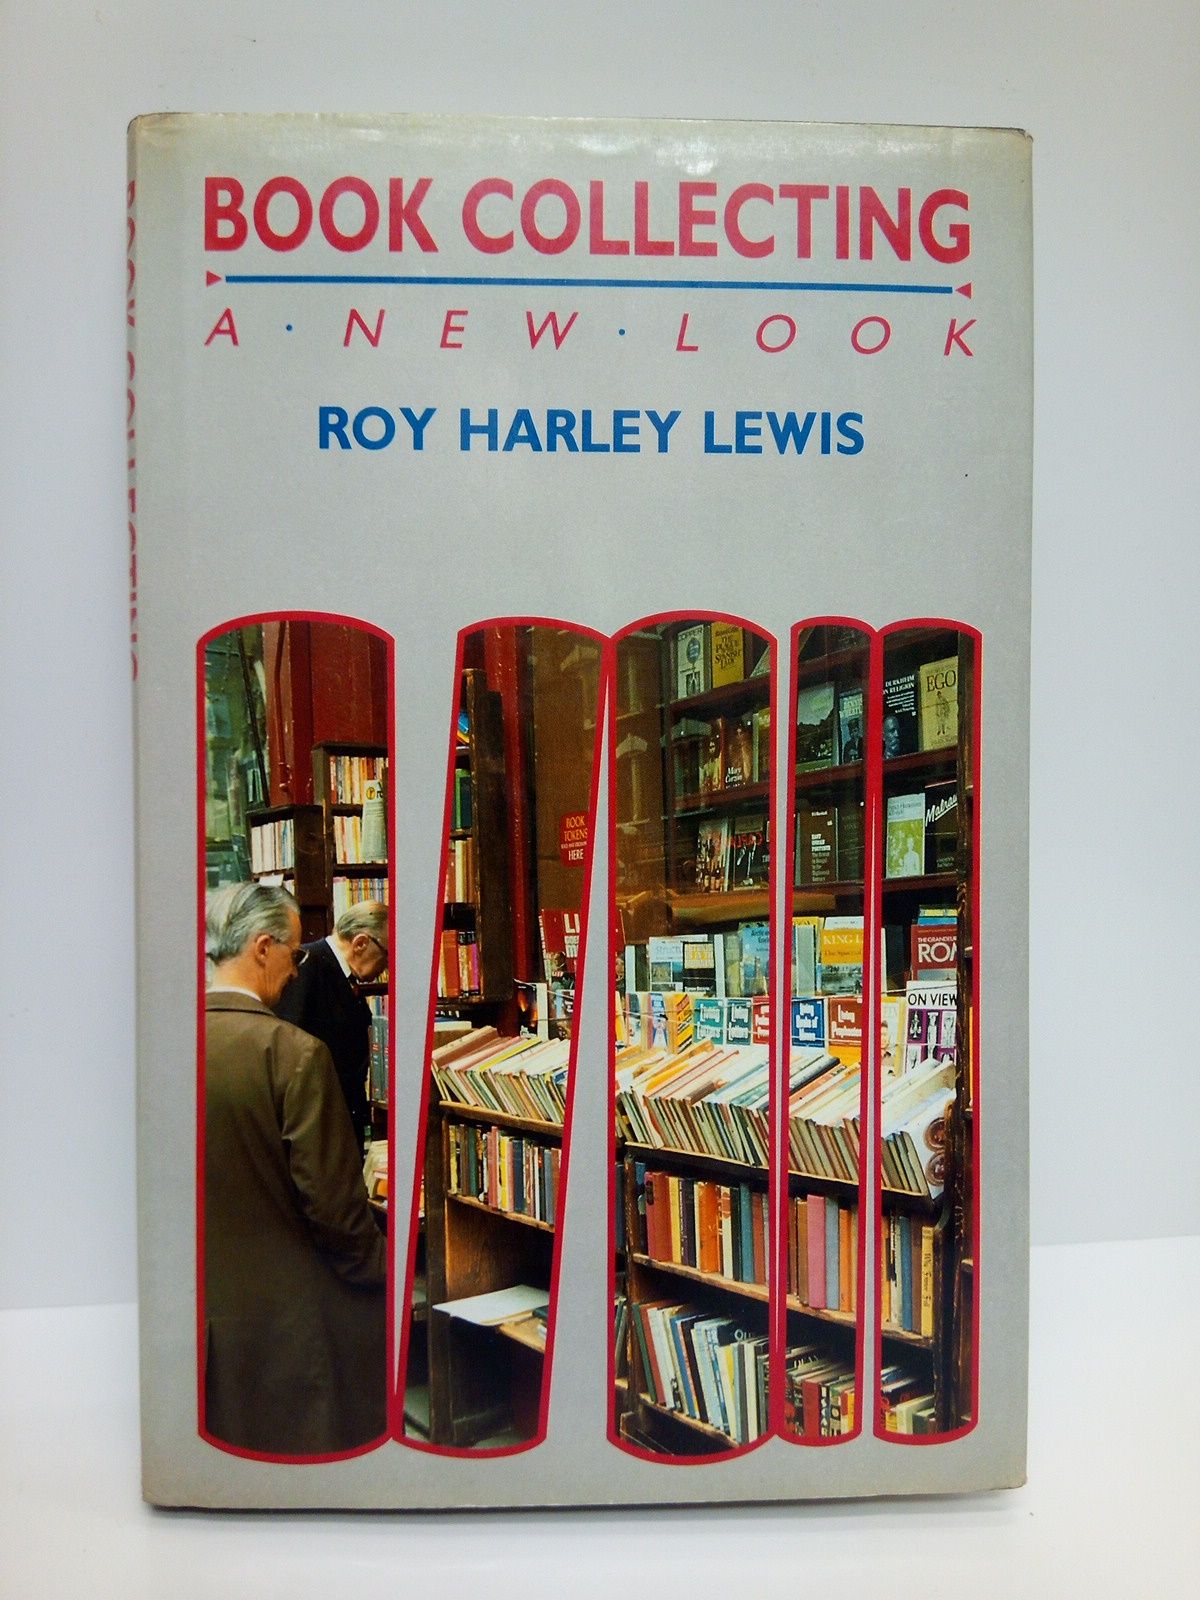 HARLEY LEWIS, Roy - Book Collecting: an new look